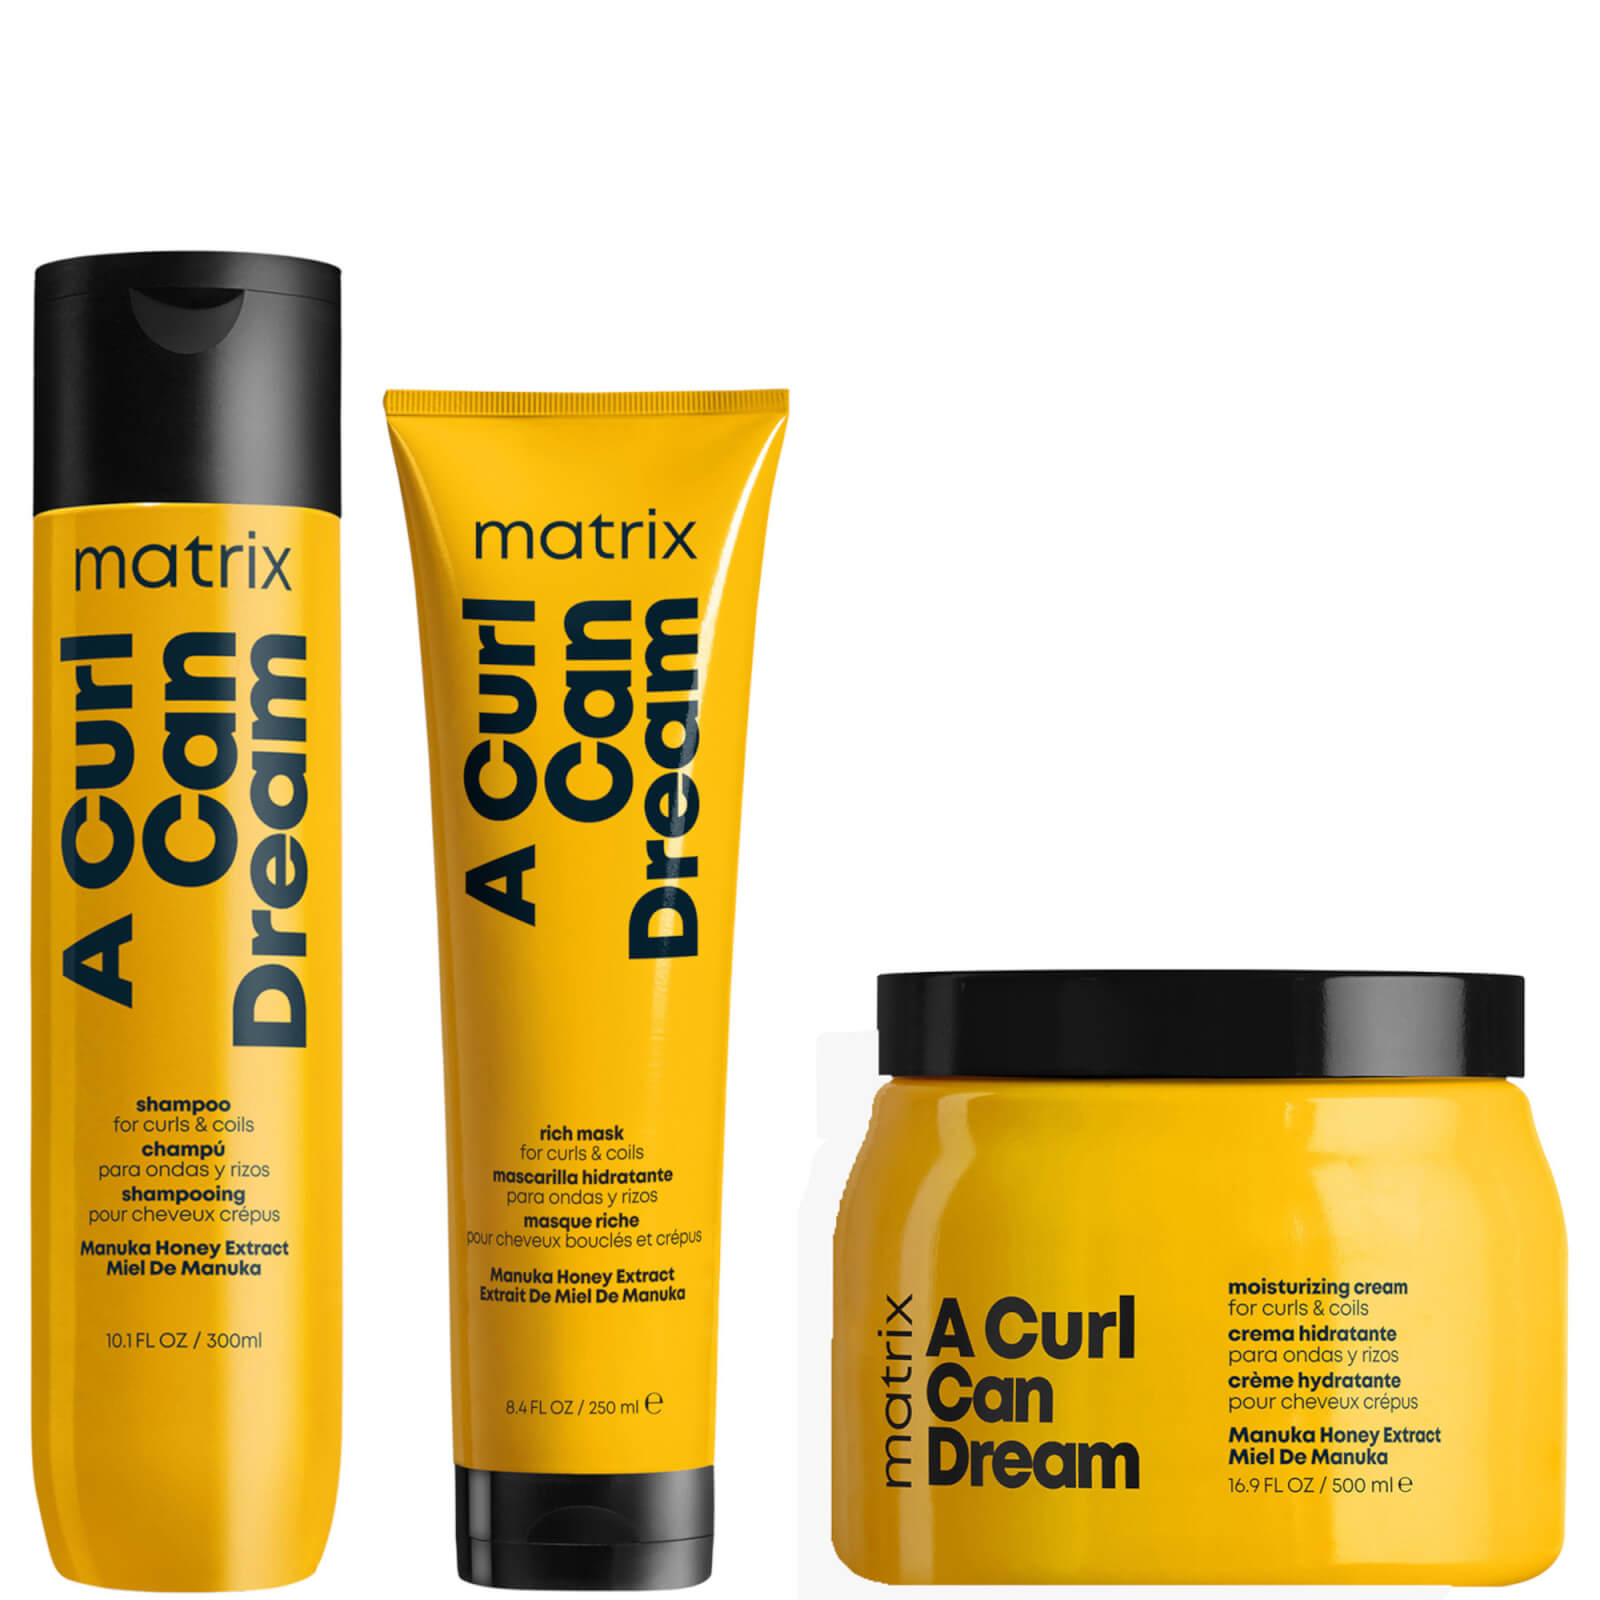 Matrix A Curl Can Dream Manuka Honey Infused Shampoo, Mask and Leave-in Cream Routine for Curls and 